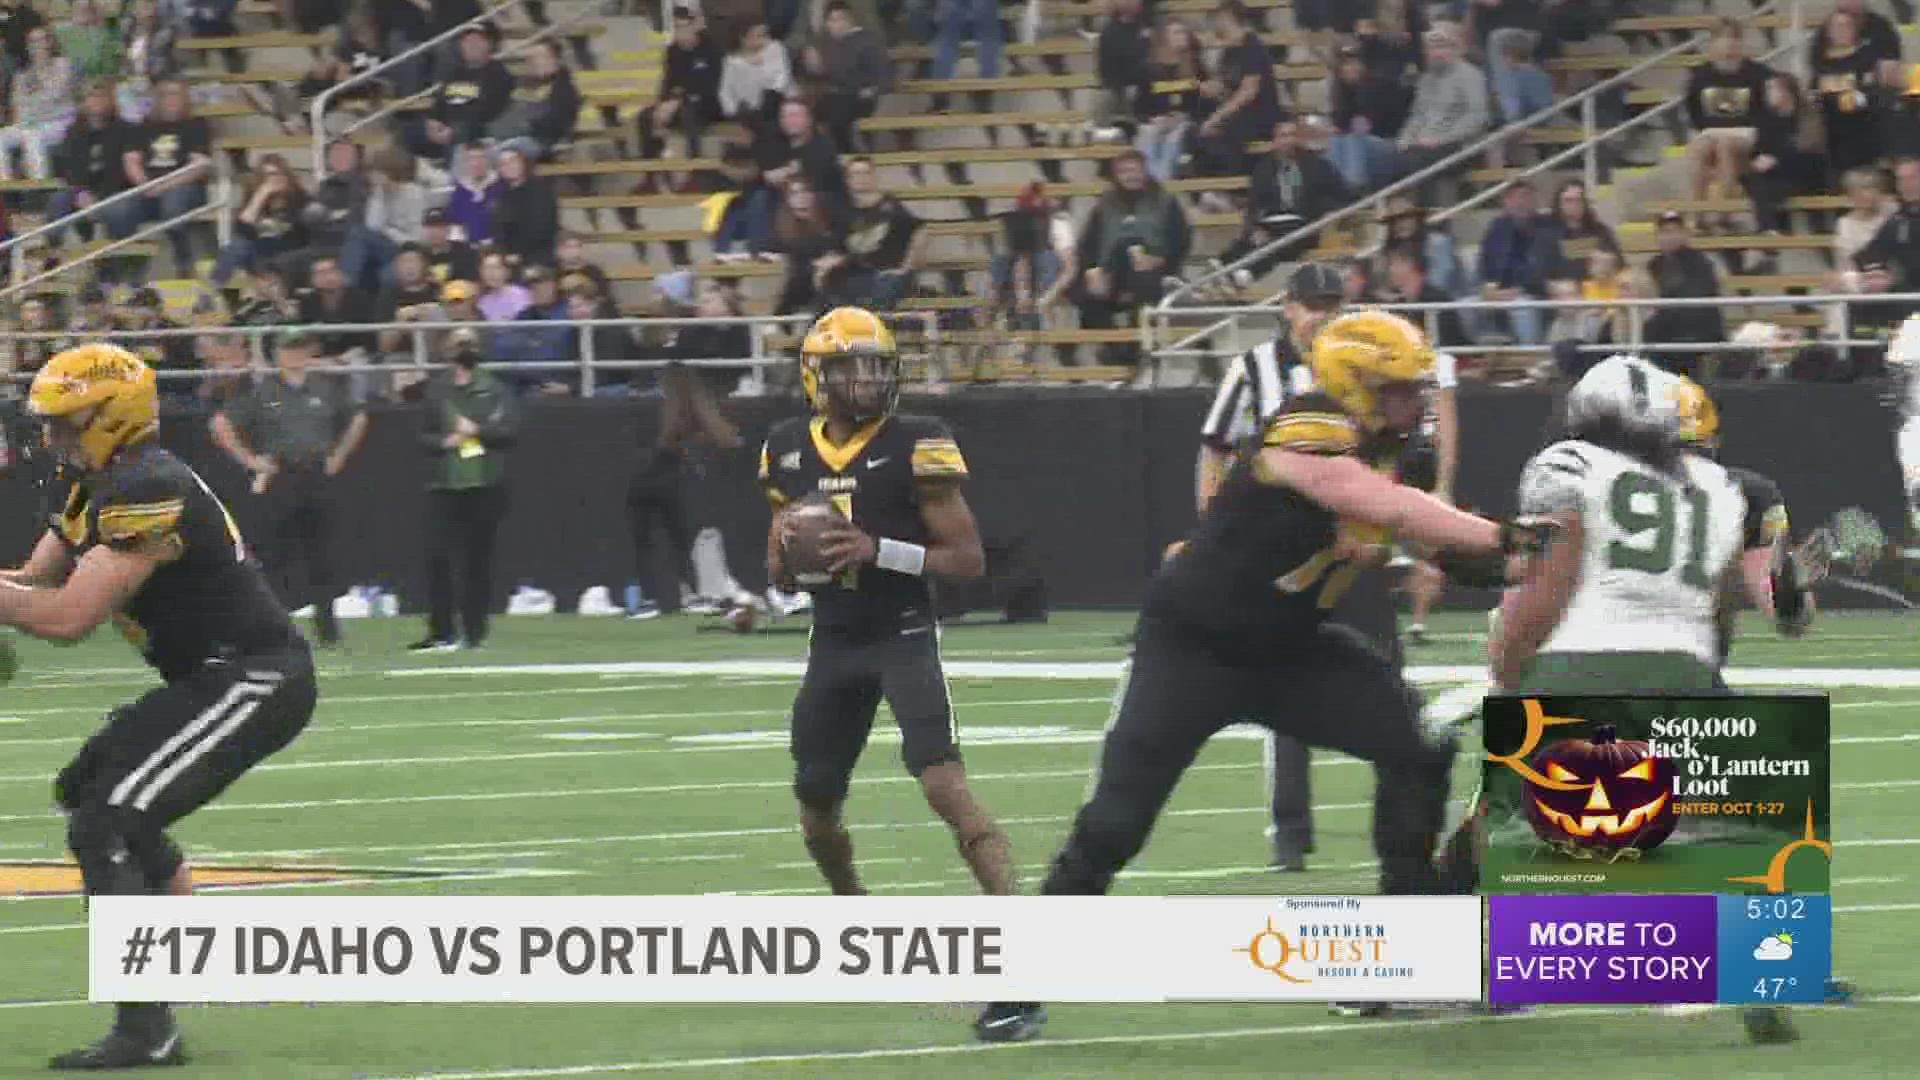 The Vandals remain unbeaten in Big Sky Conference play topping Portland State 56-21 in the Kibbie Dome.